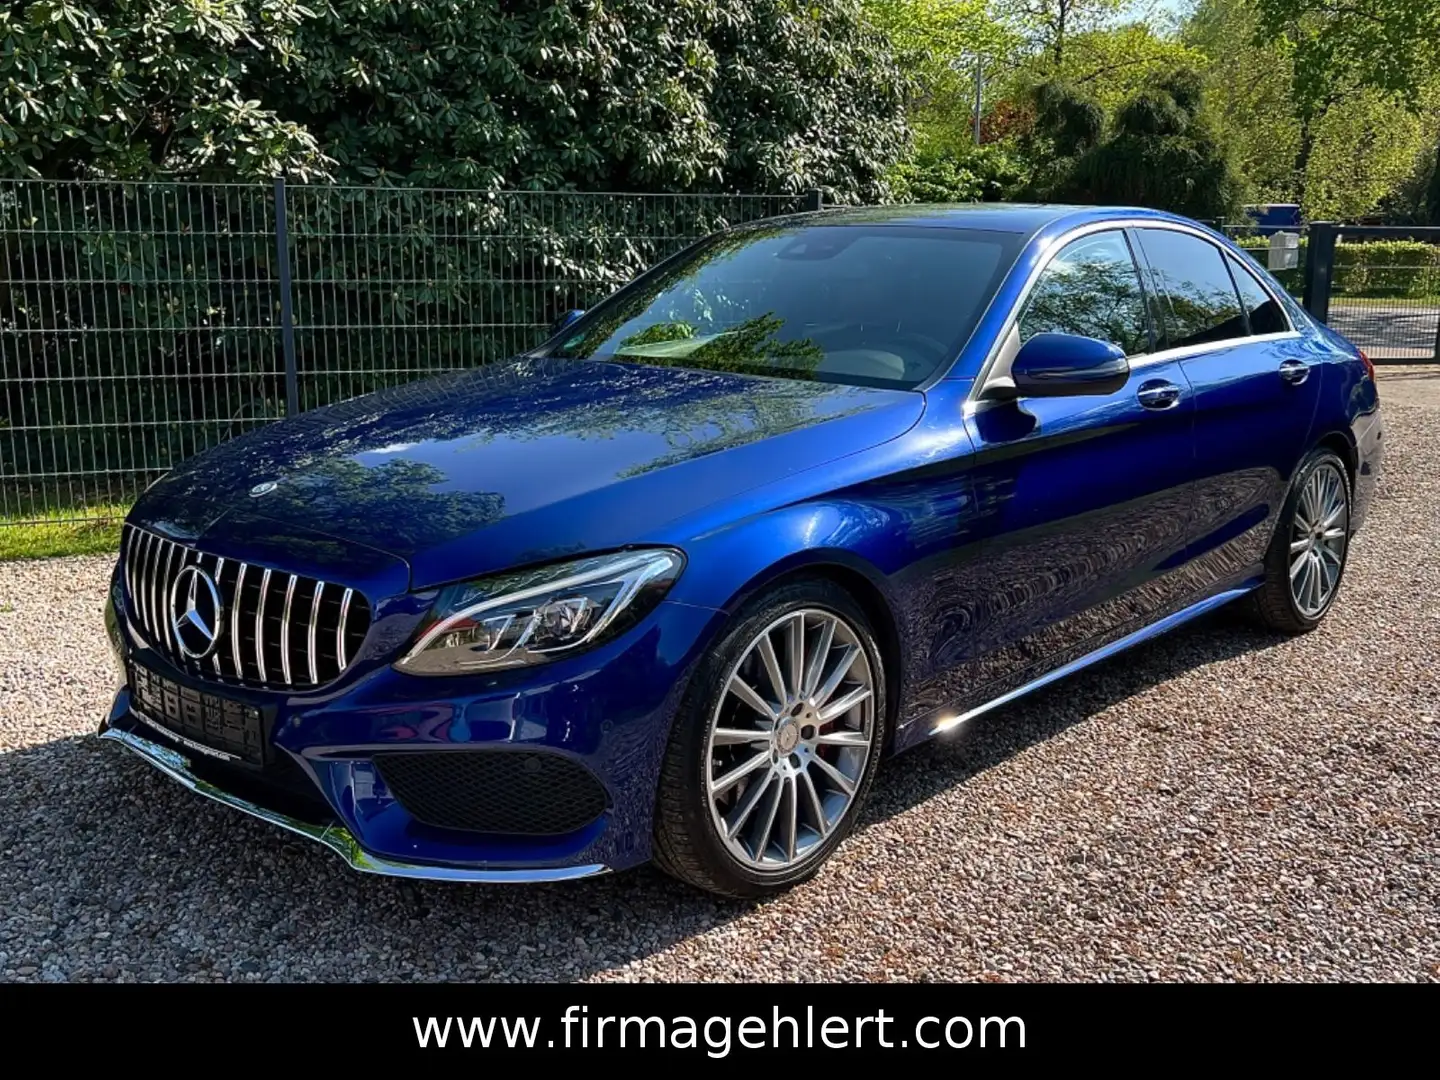 Mercedes-Benz C 400 LIMO 4MATIC+AMG+LED+AIRMATIC+MEMORY Blauw - 1